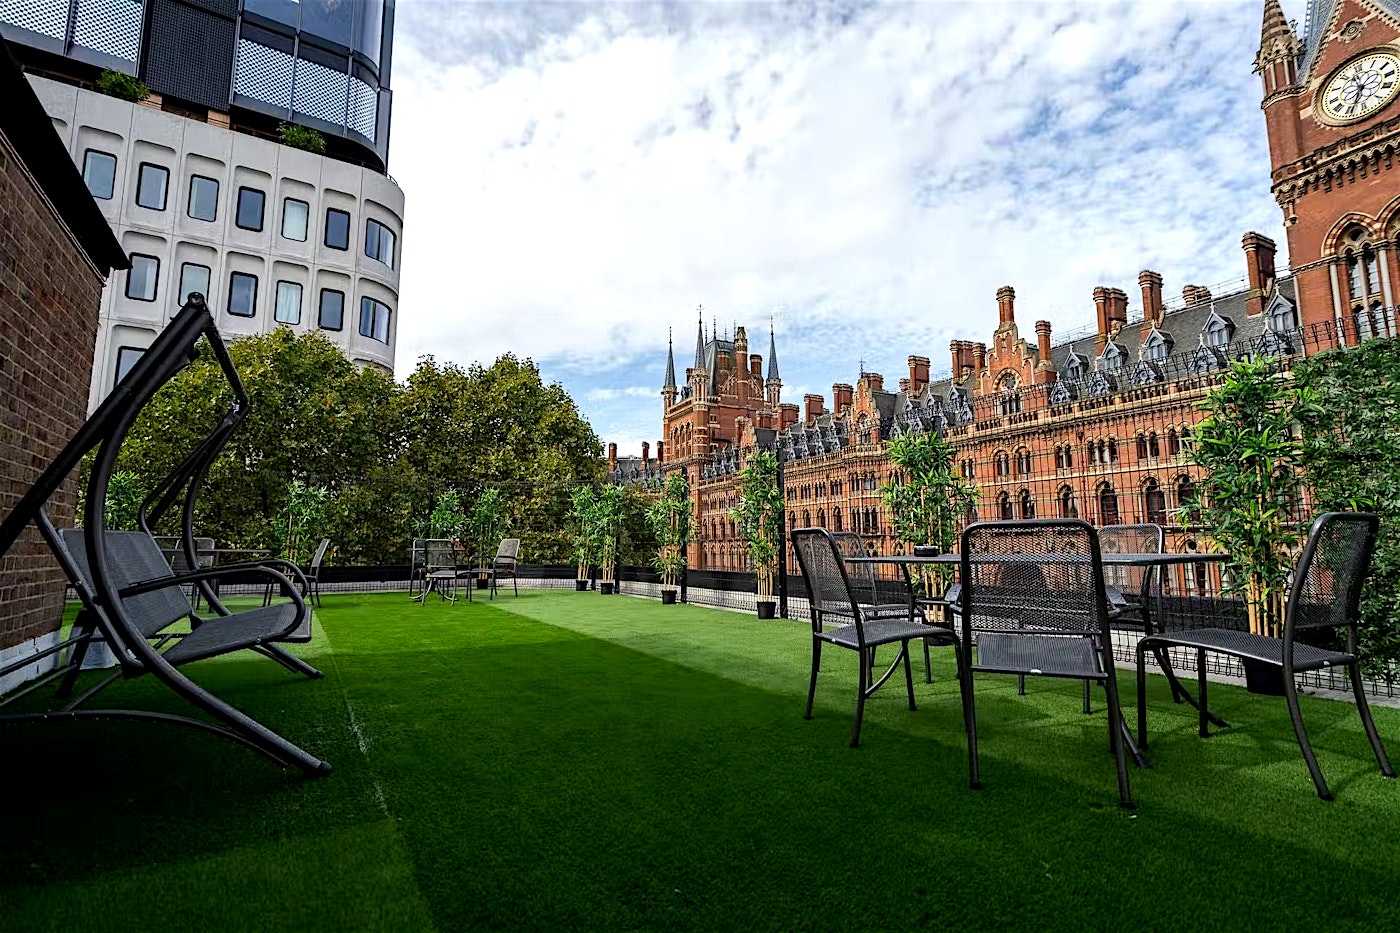 Take a break from your meeting on this open-air terrace